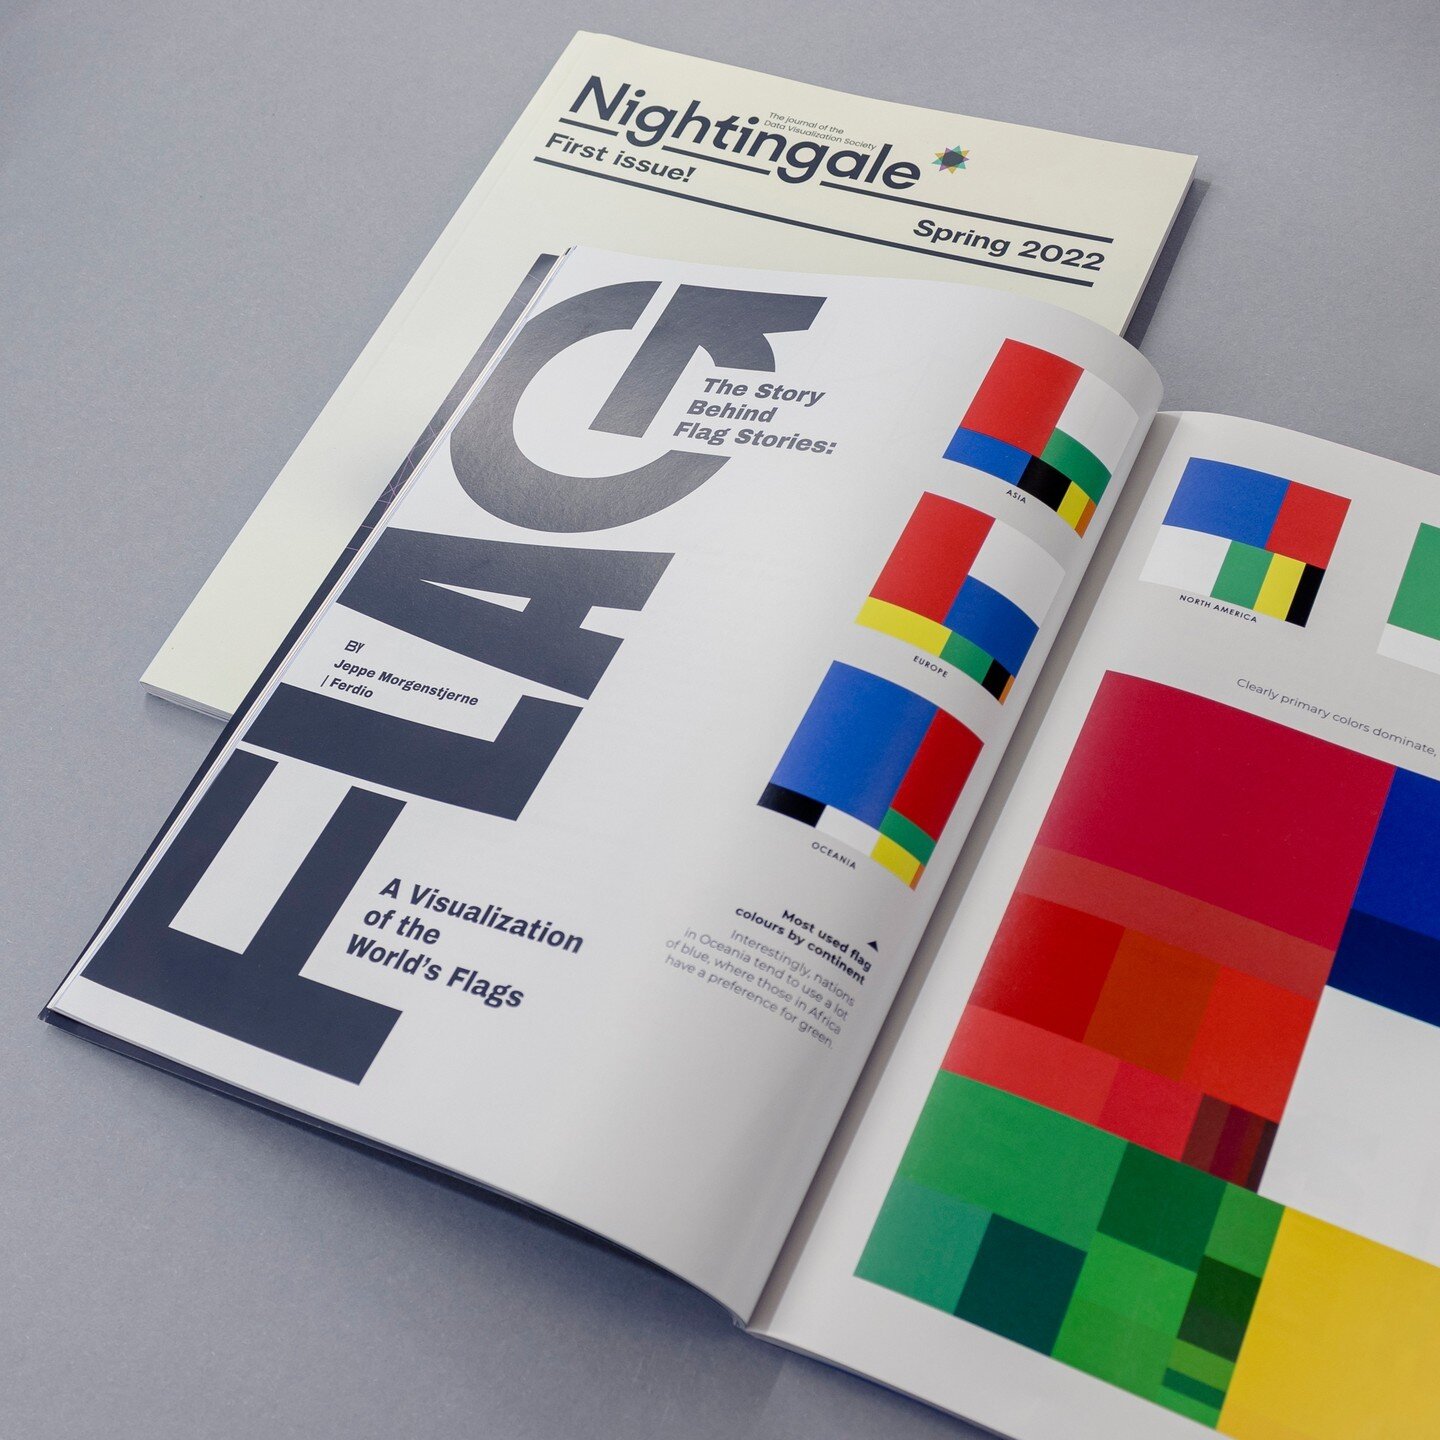 Thrilled and honored to see that our Flag Stories project got featured in the very first issue of the Nightingale Magazine! It&rsquo;s a journal from the lovely people at @datavizsociety showcasing some of the most compelling data visualization proje